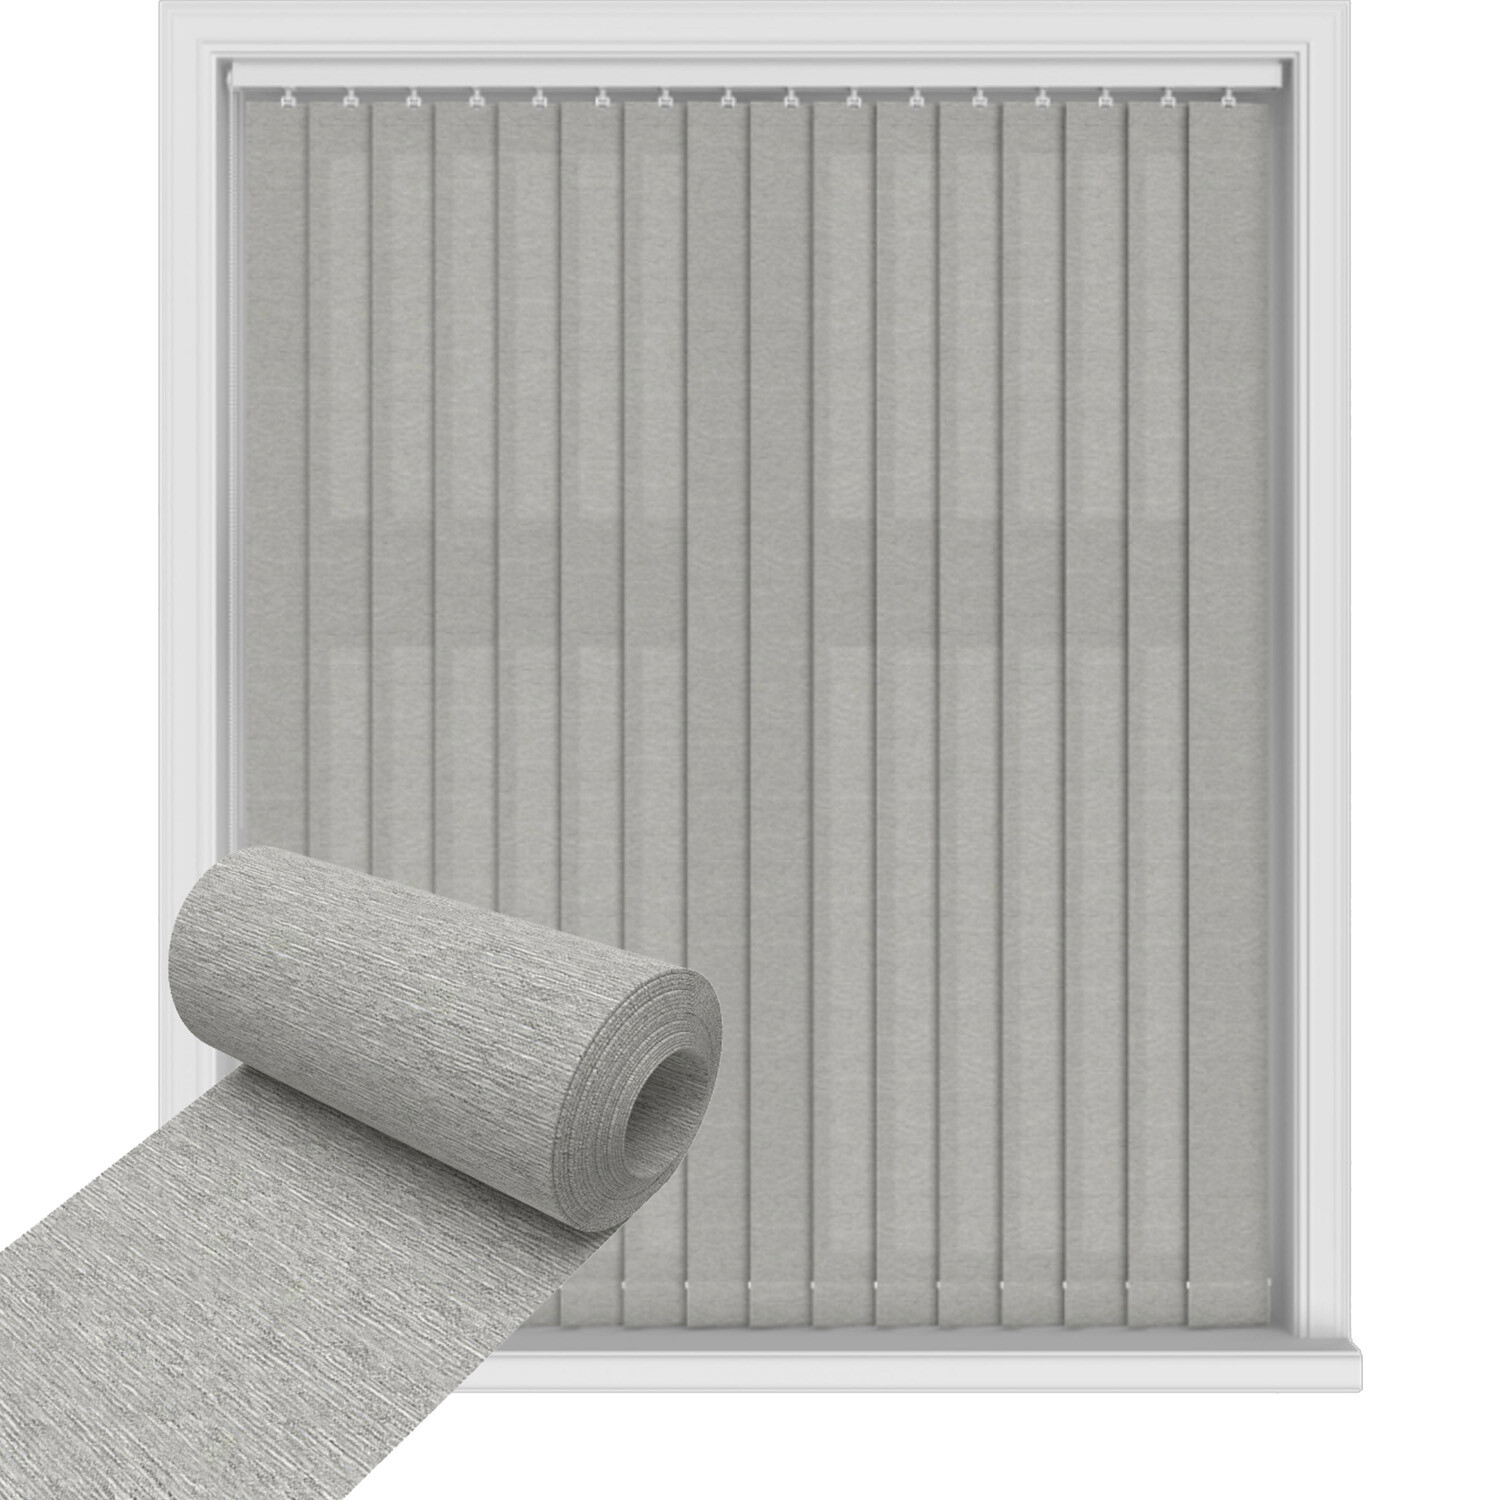 Vertical Blinds Grey 2.44 x 1m Image 2